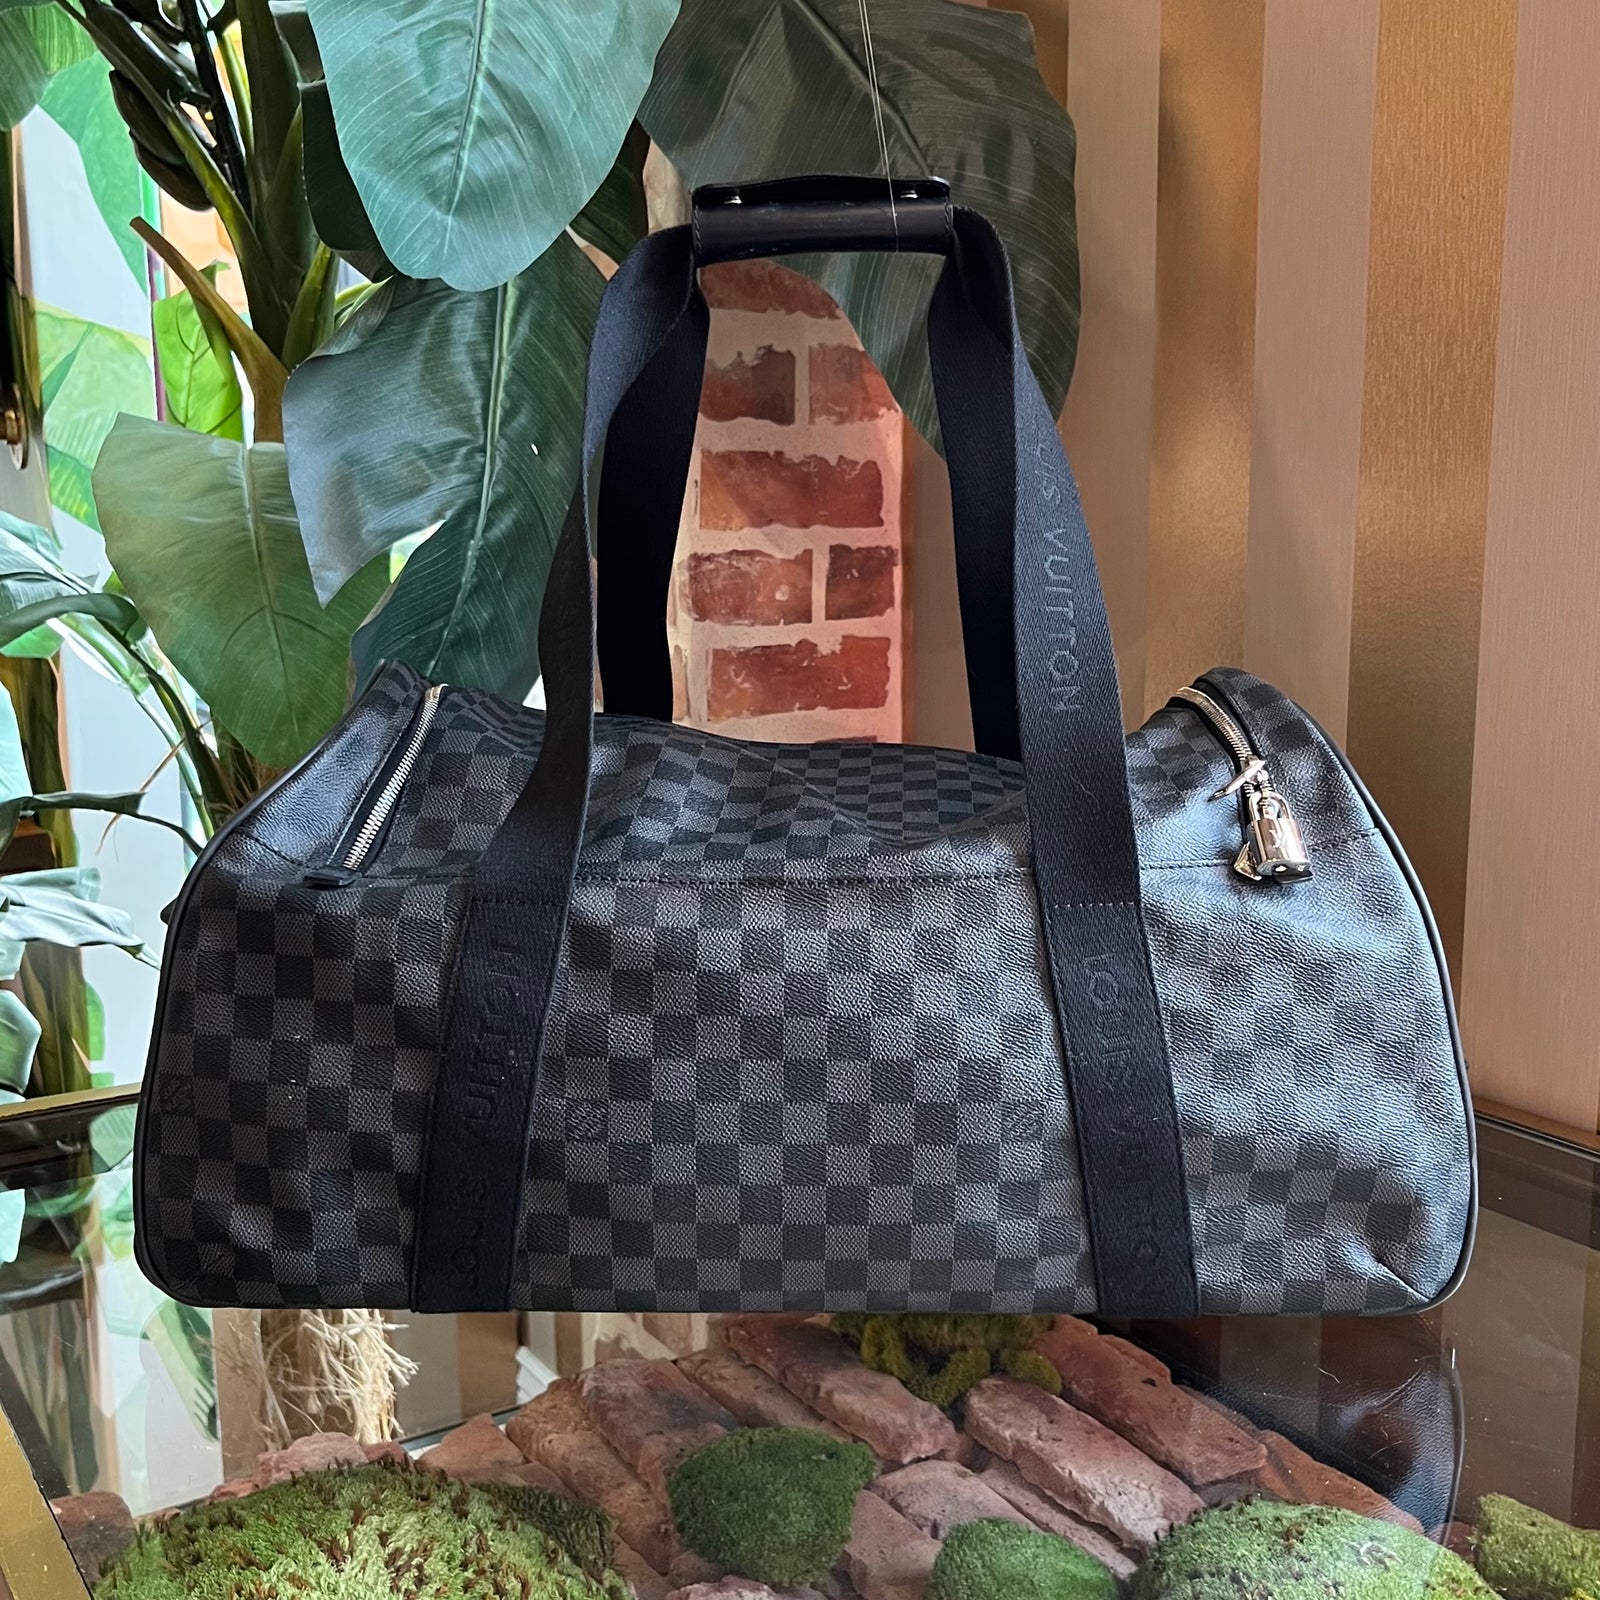 Authentic Louis Vuitton Bags, Shoes, and Accessories Tagged Color_Black -  The Purse Ladies